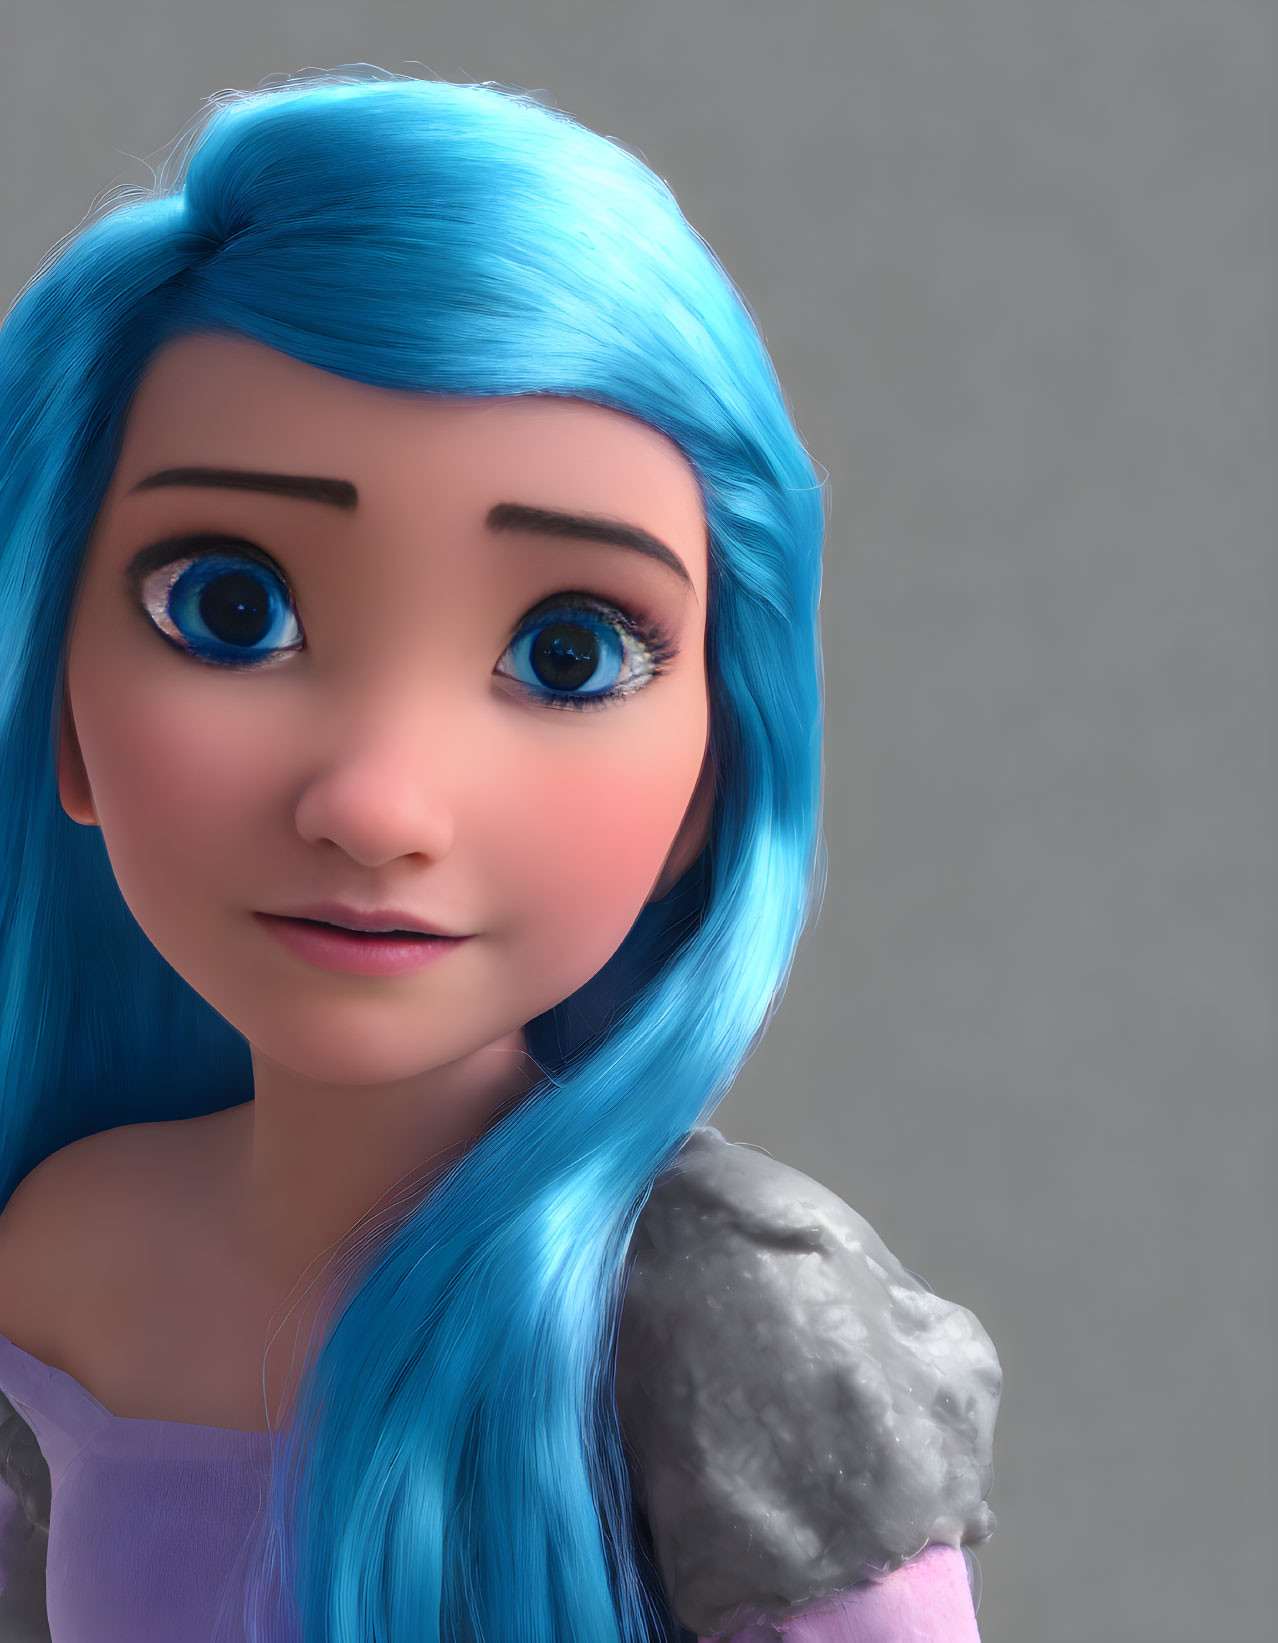 Striking 3D Animated Character with Blue Hair and Purple Outfit